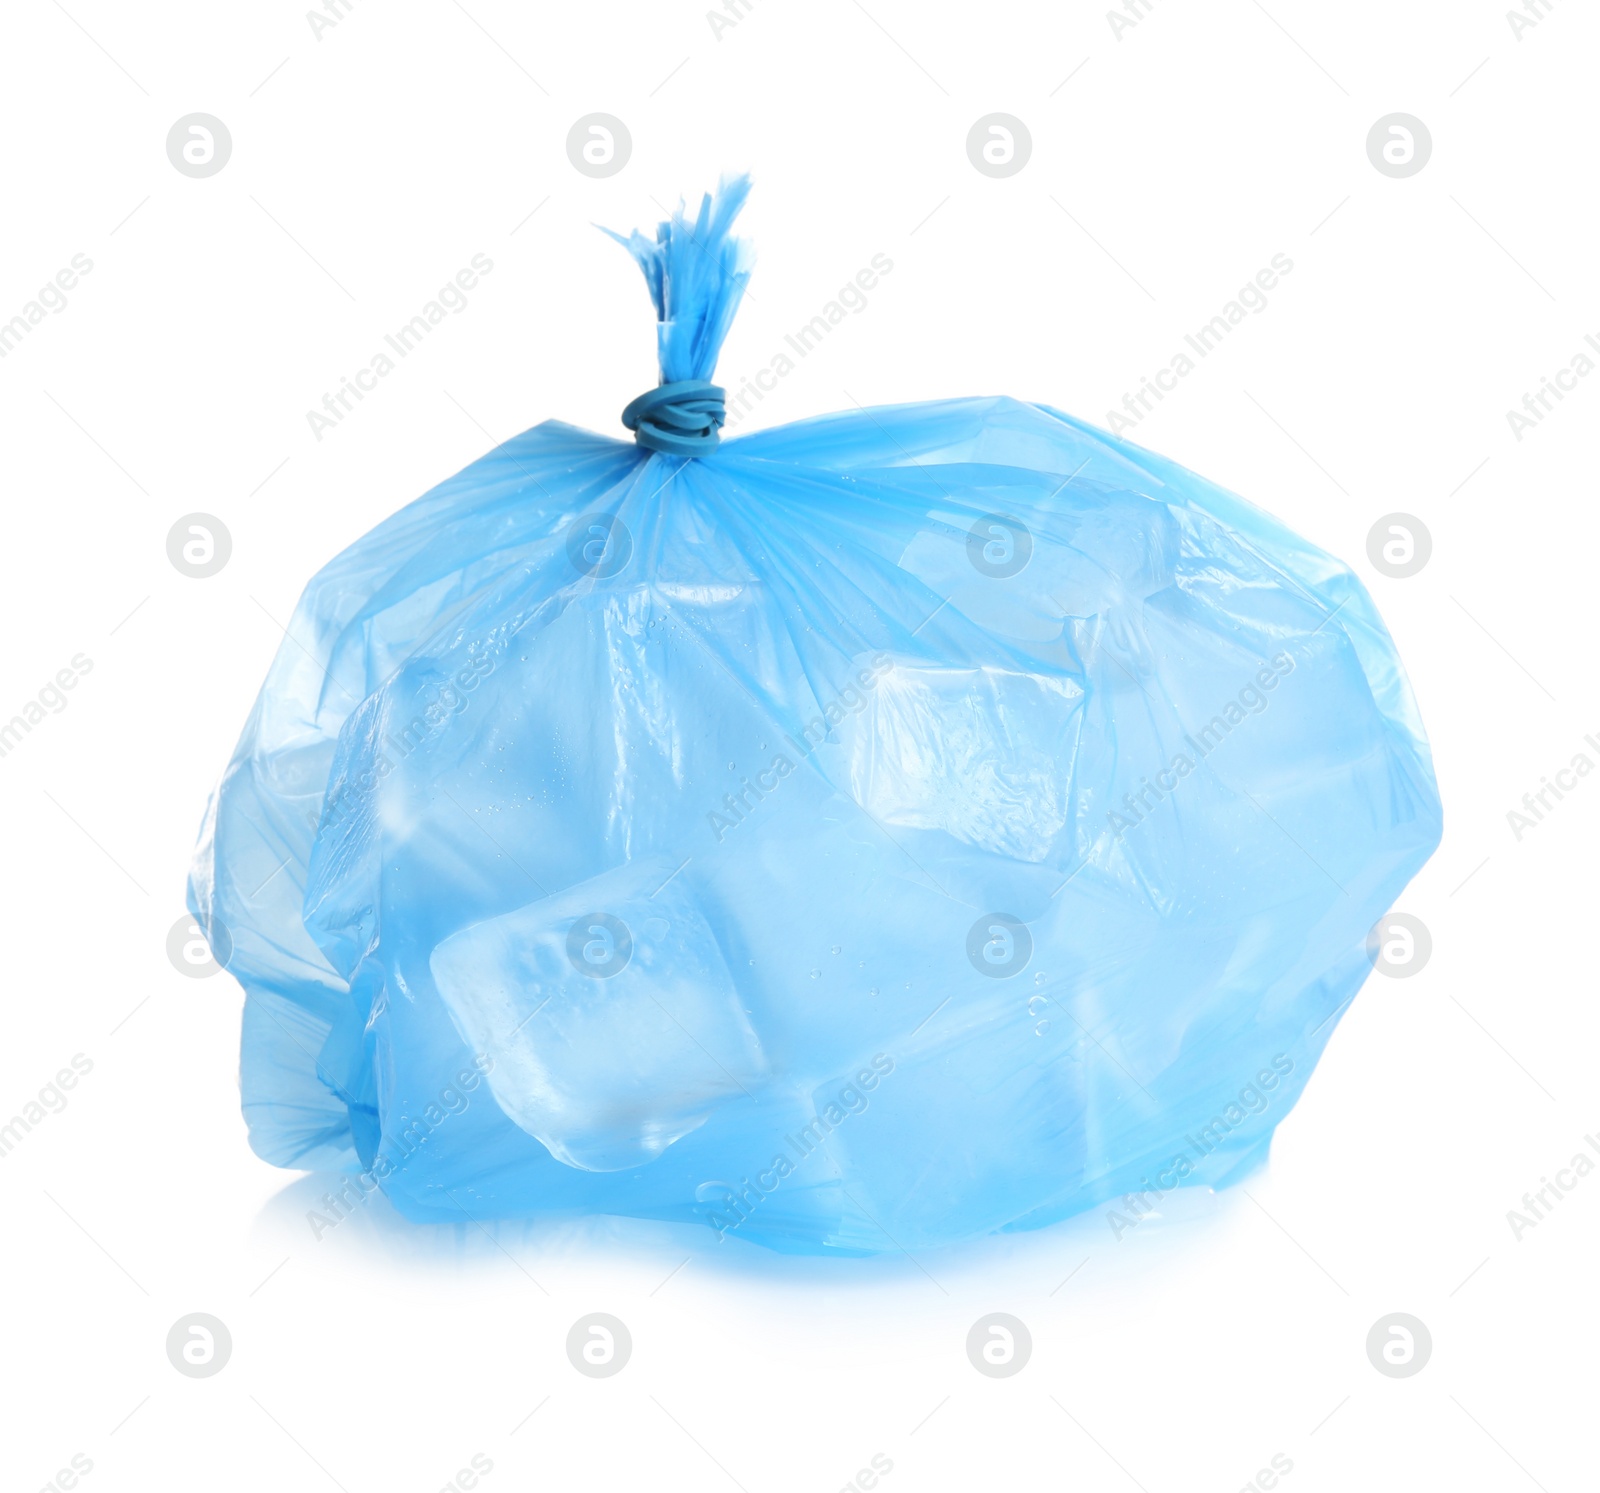 Photo of Plastic bag with ice cubes on white background